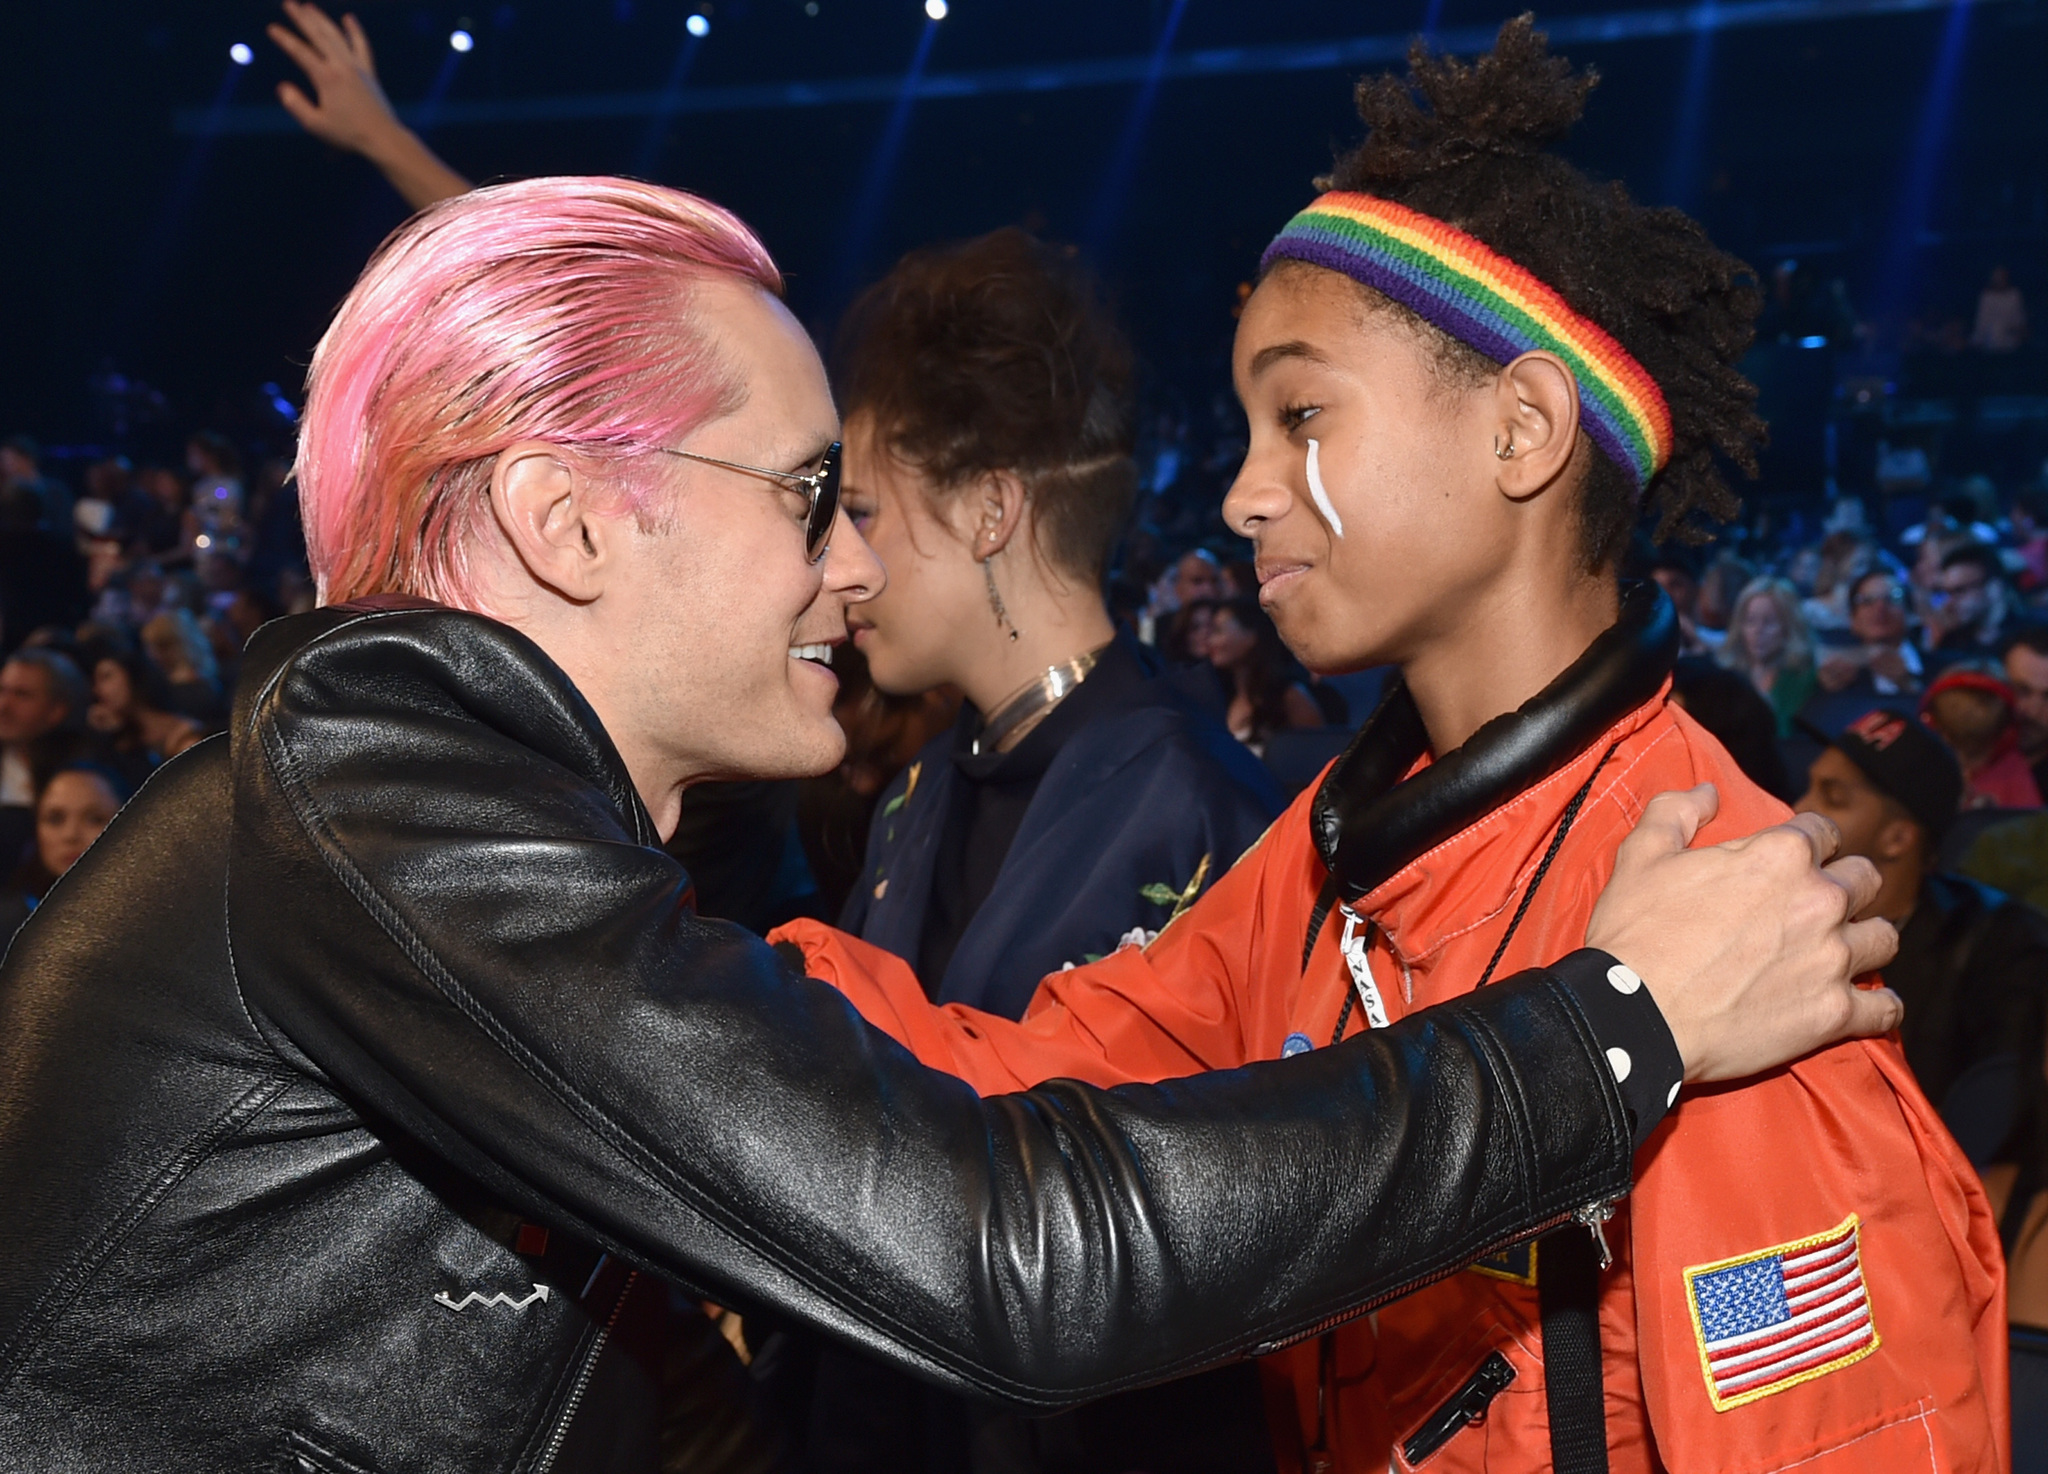 Jared Leto and Willow Smith